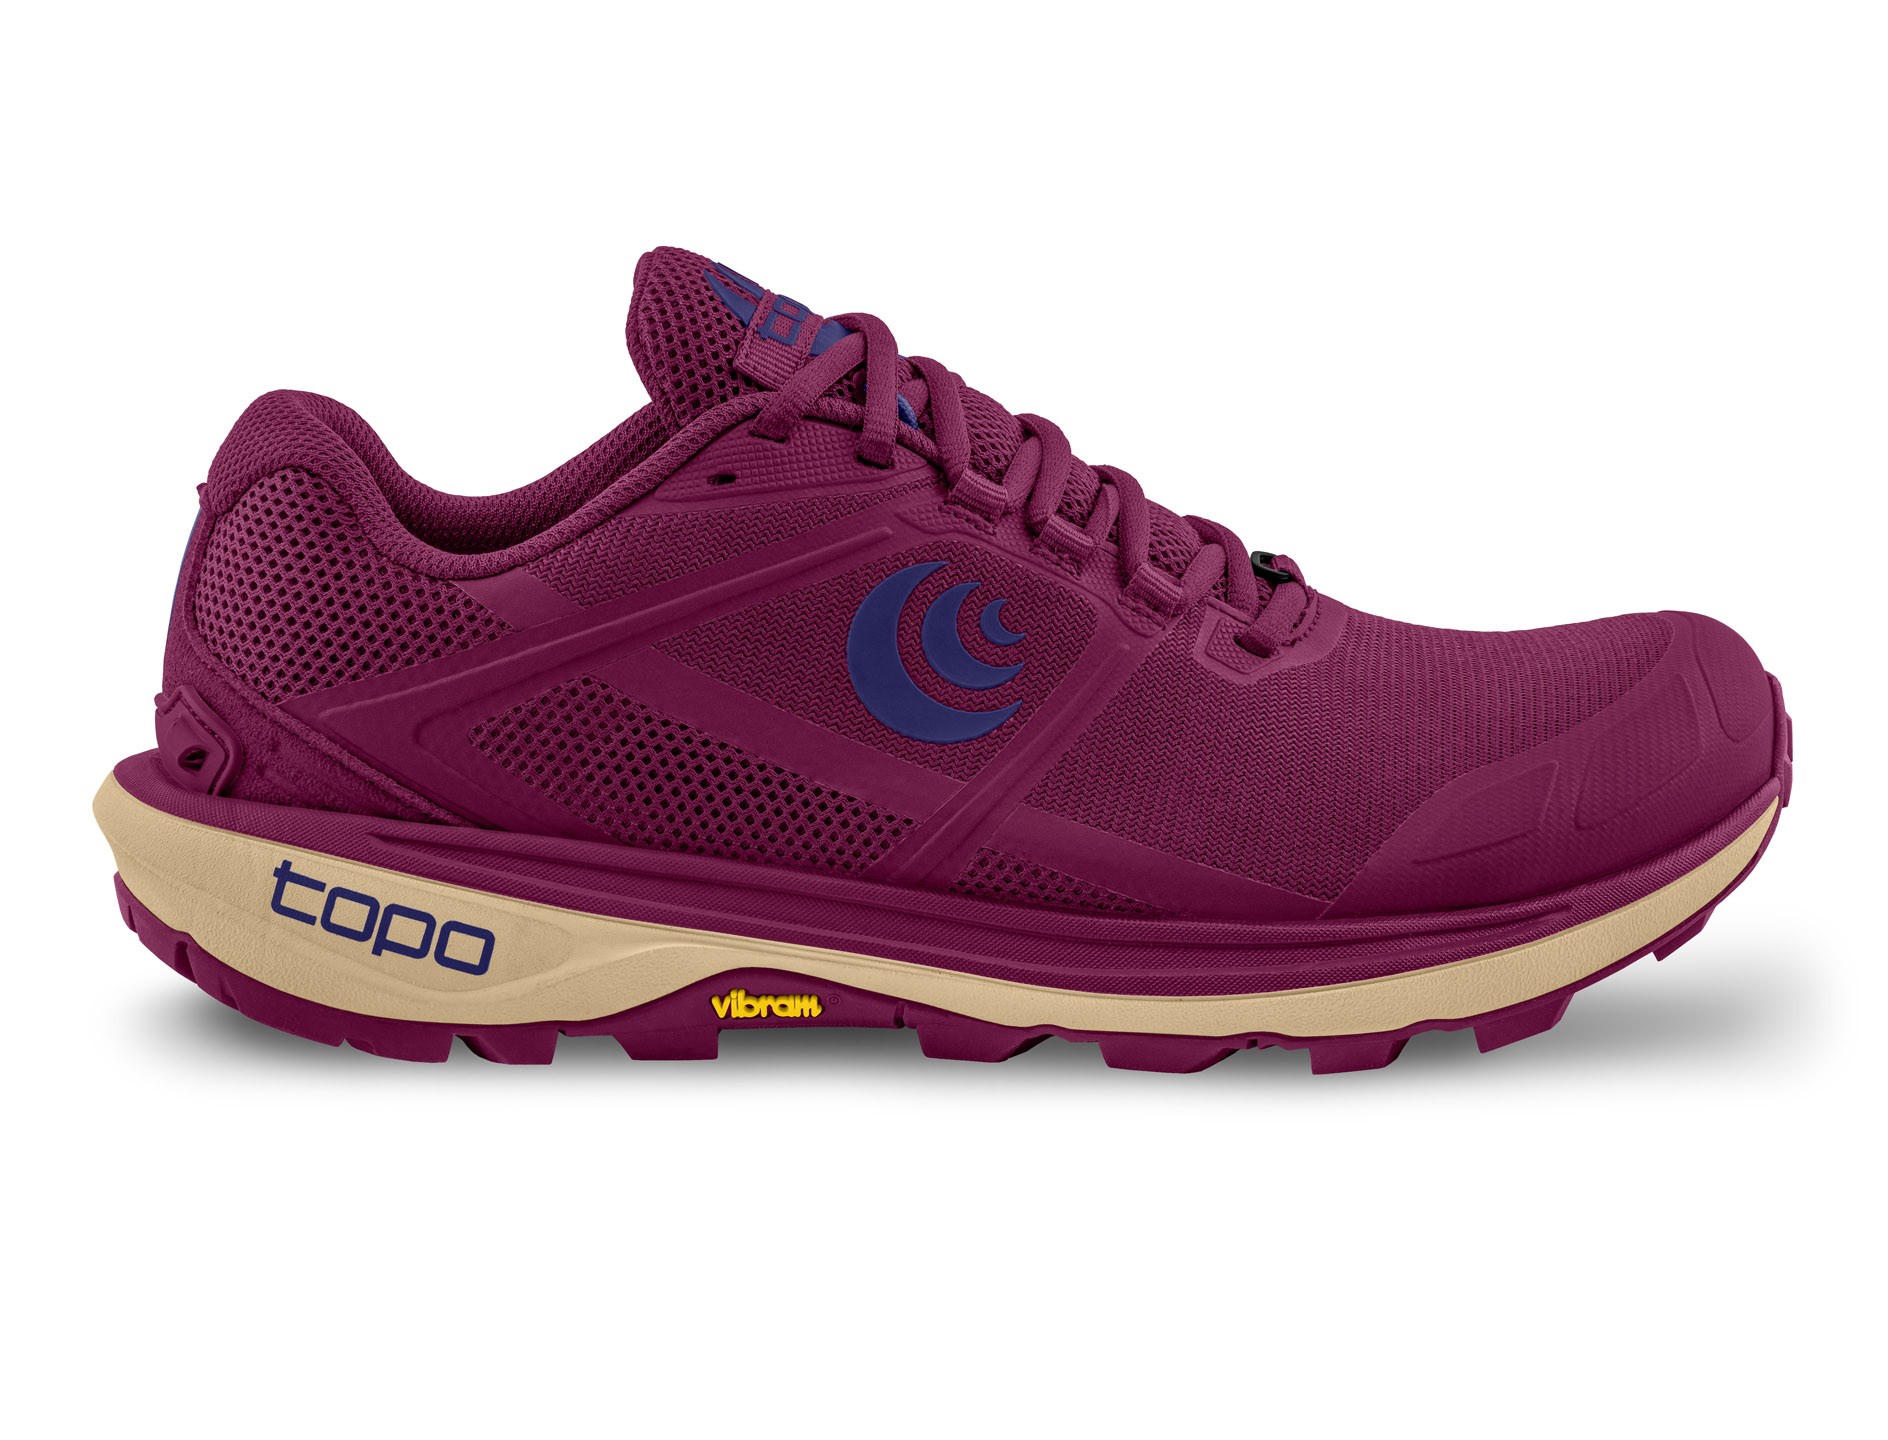 Topo Terraventure 4 - Women's Rugged Trail Running Shoes